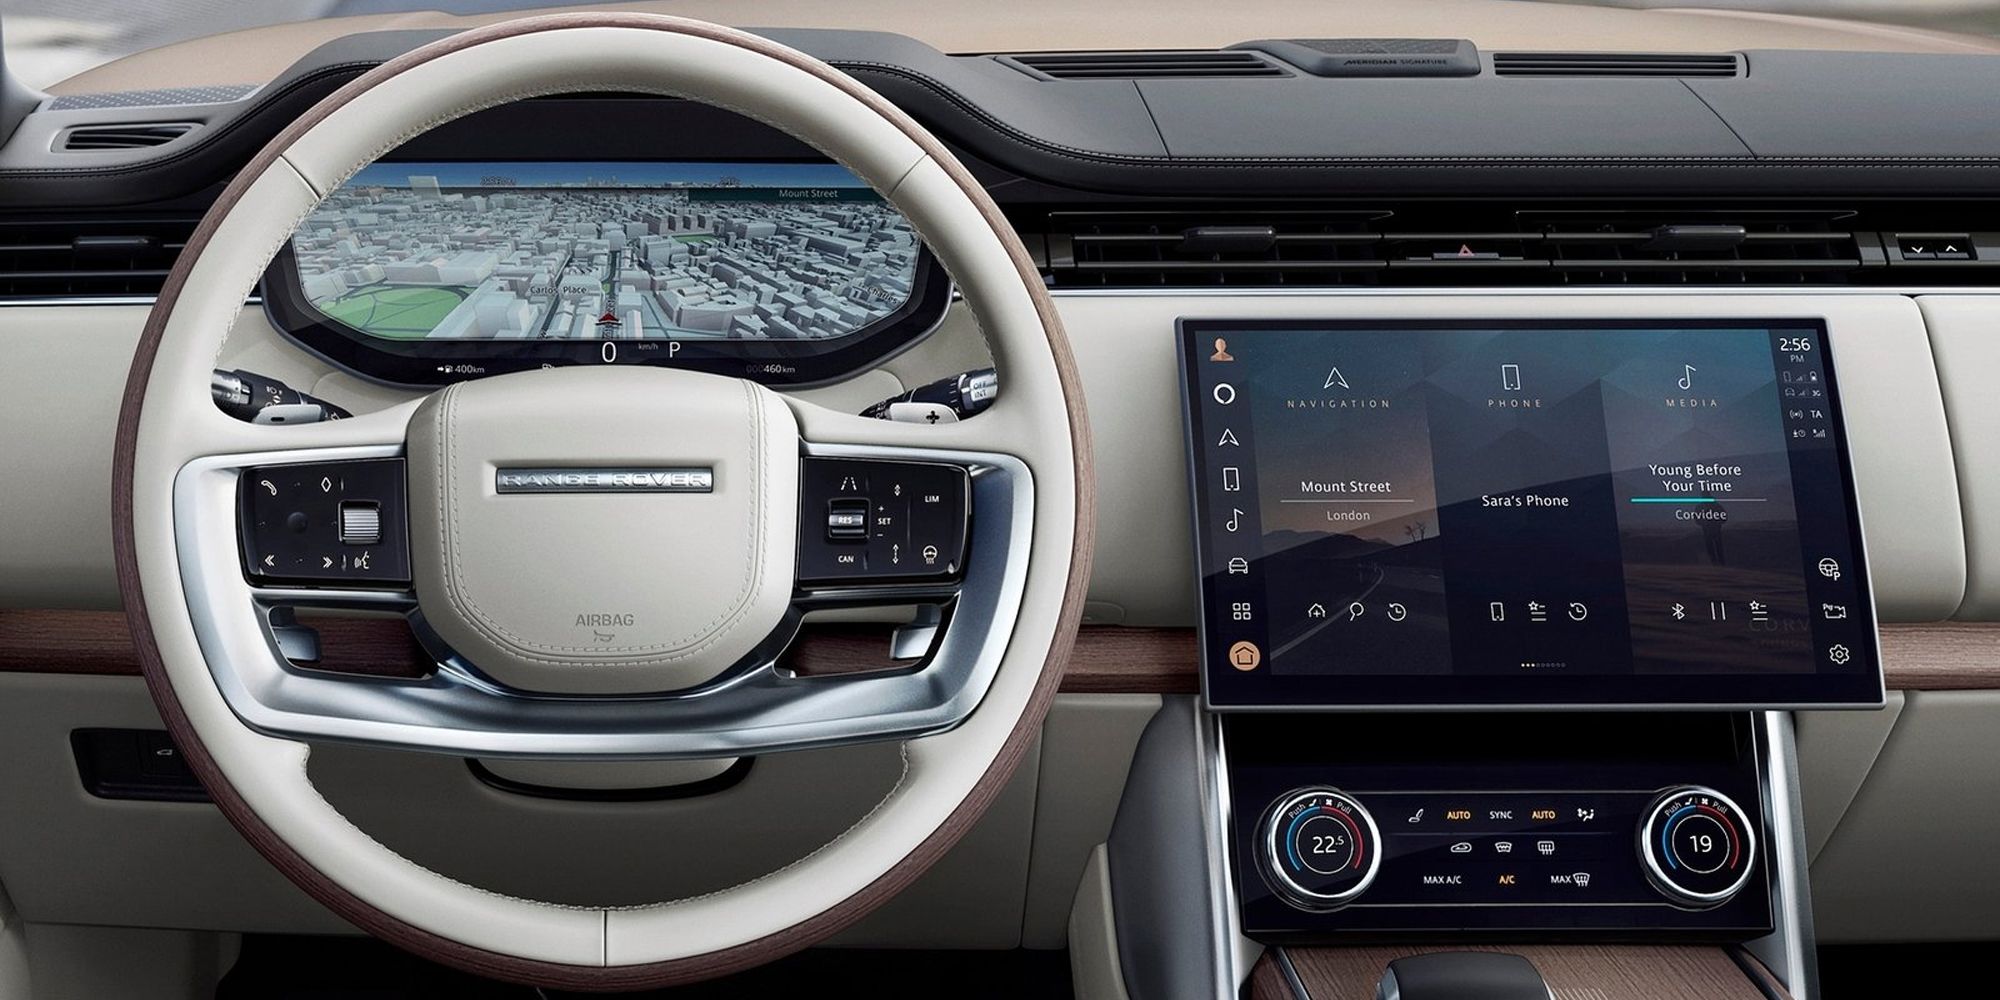 The interior of the Range Rover, from the driver's seat